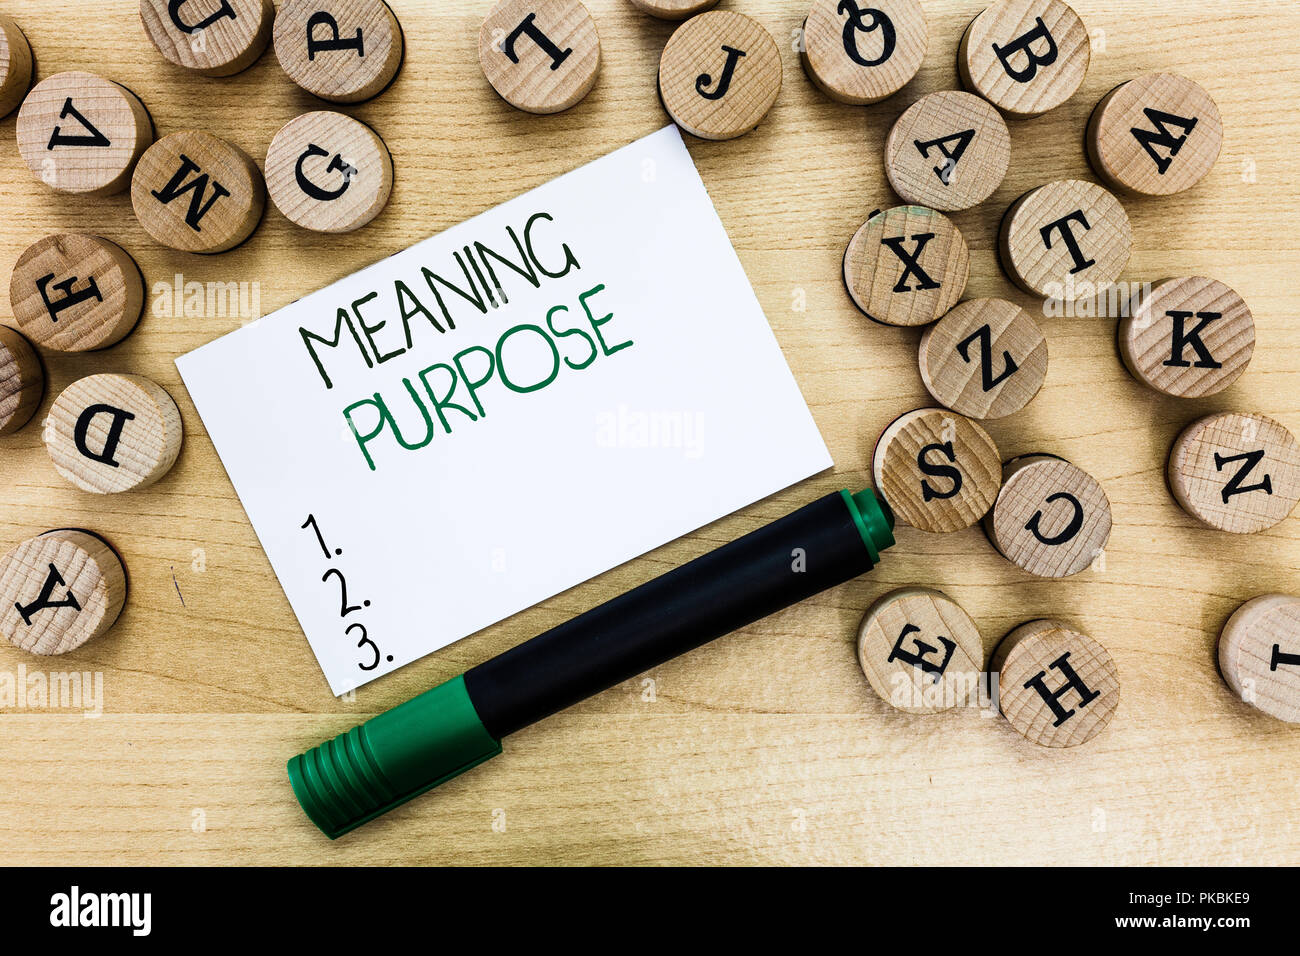 Writing note showing Meaning Purpose. Business photo showcasing The reason for which something is done or created and exists. Stock Photo